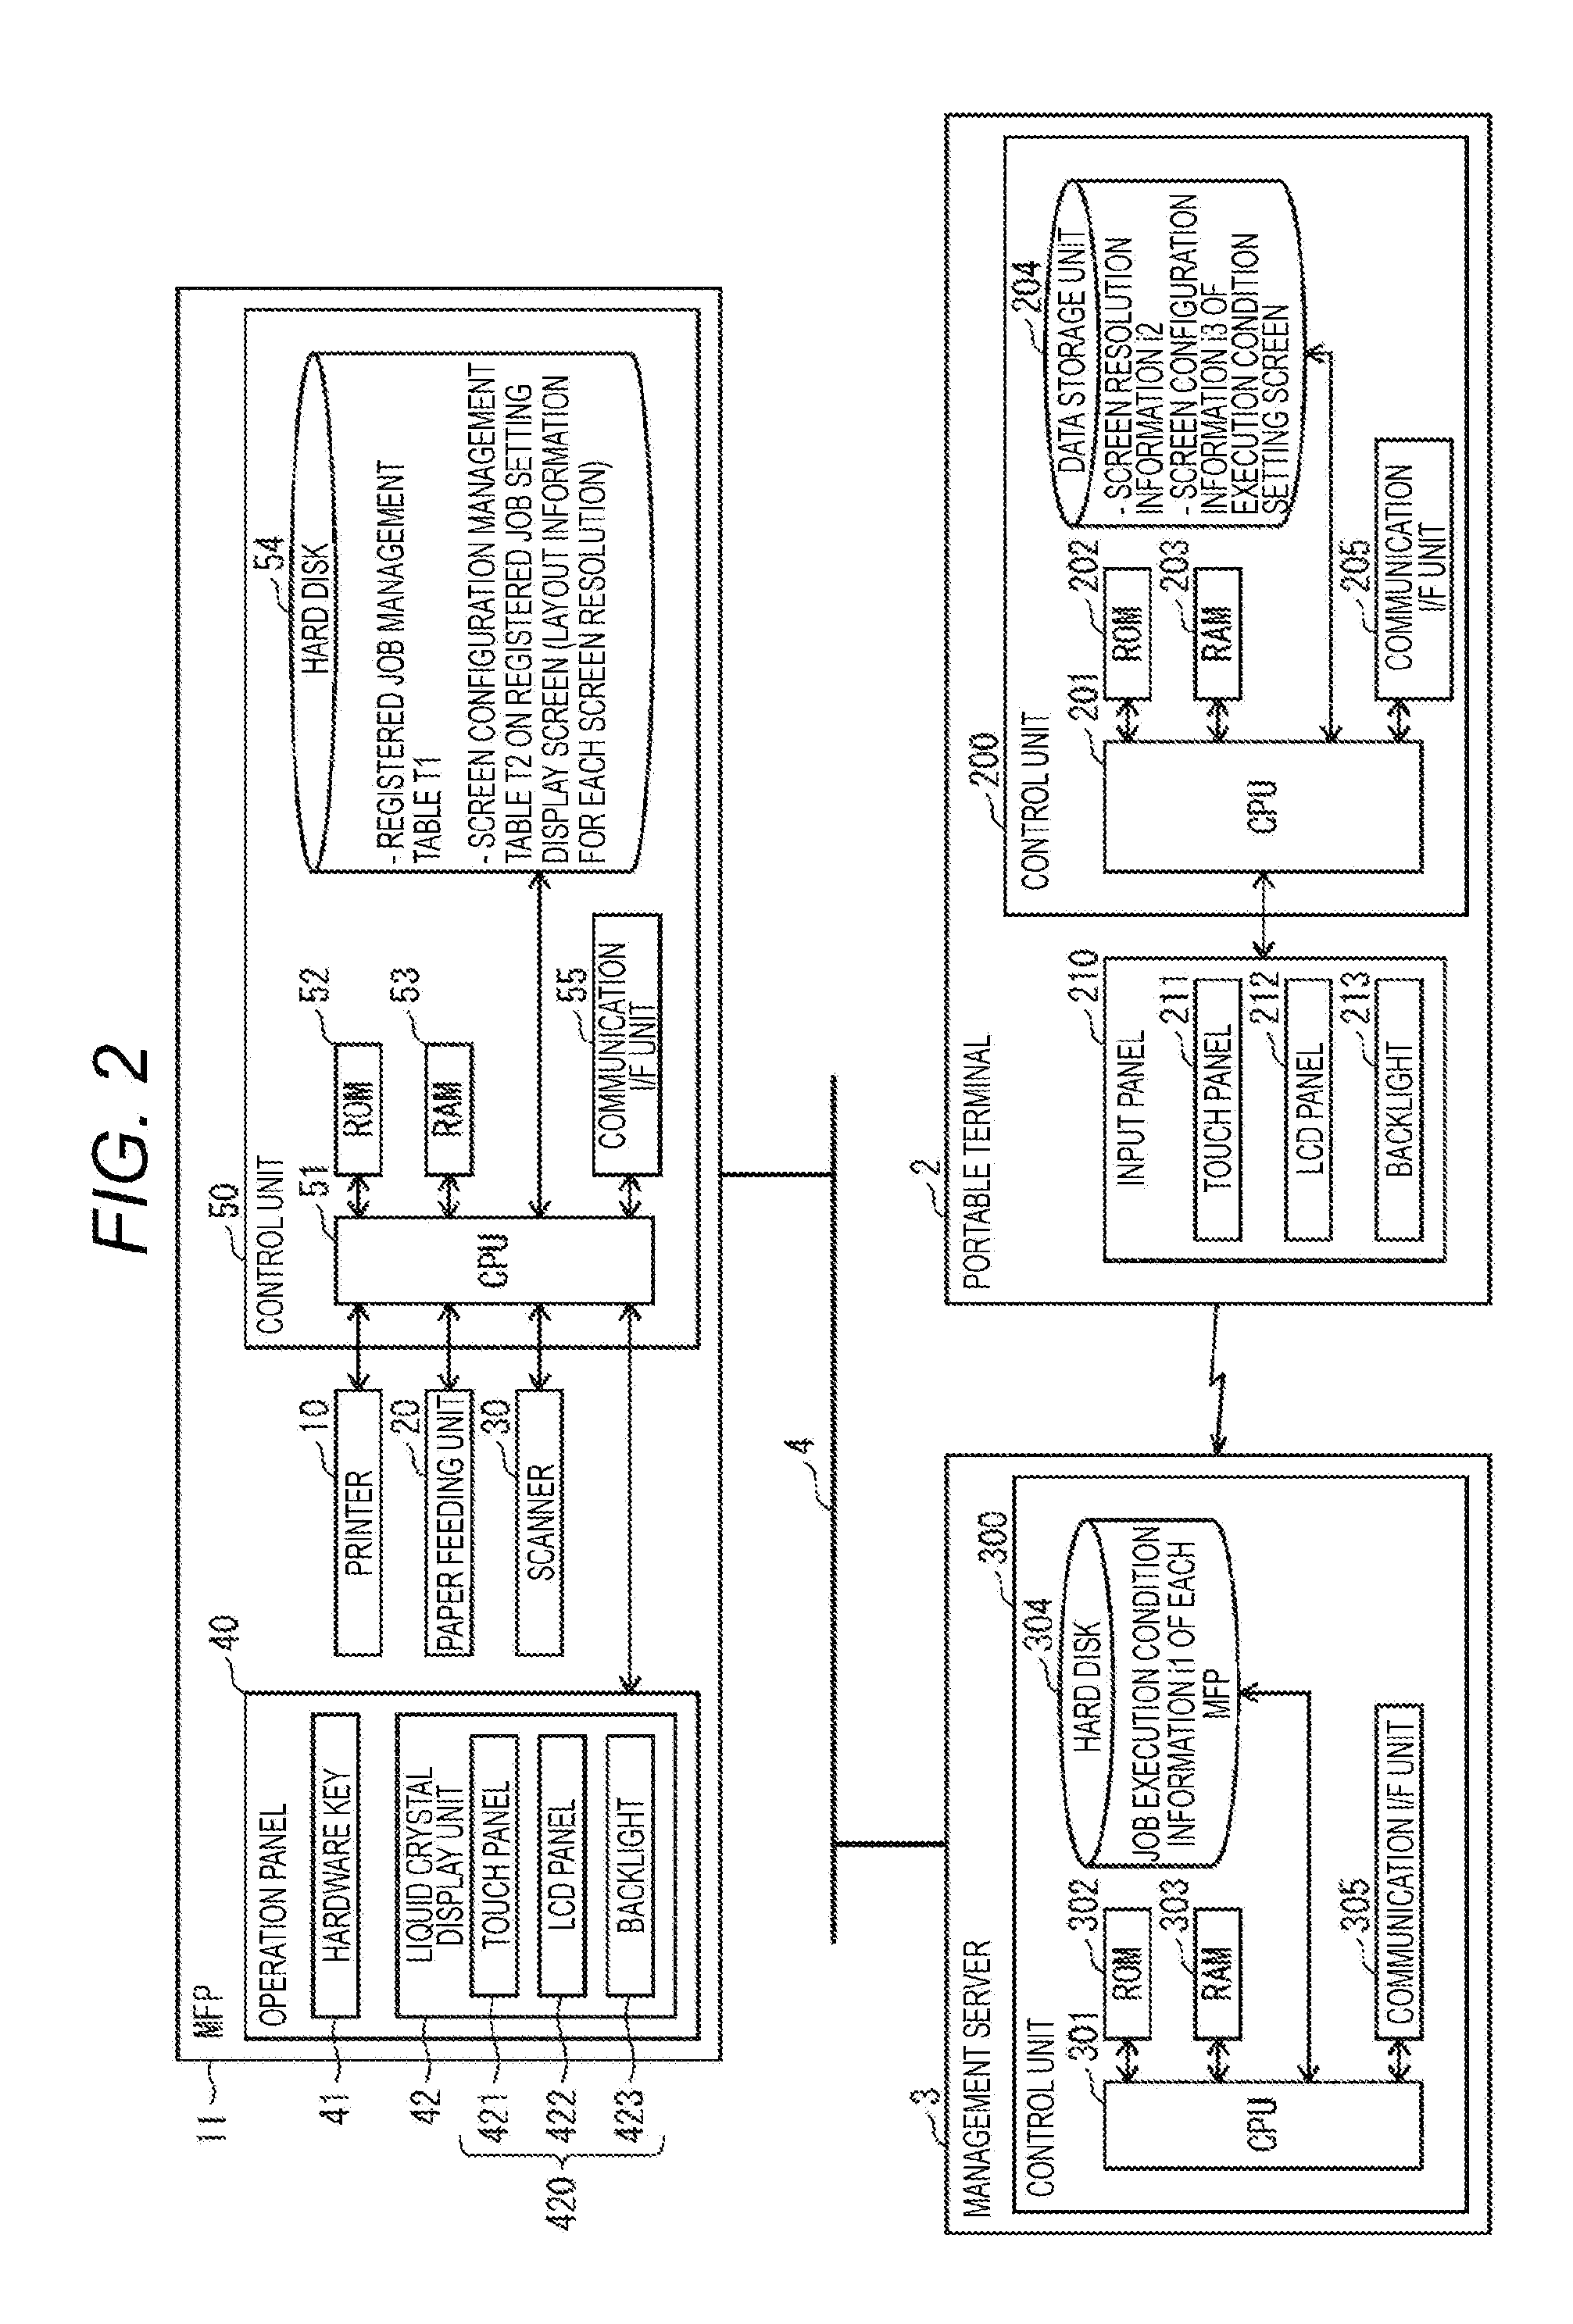 Image processing system, image processing apparatus, and portable information terminal